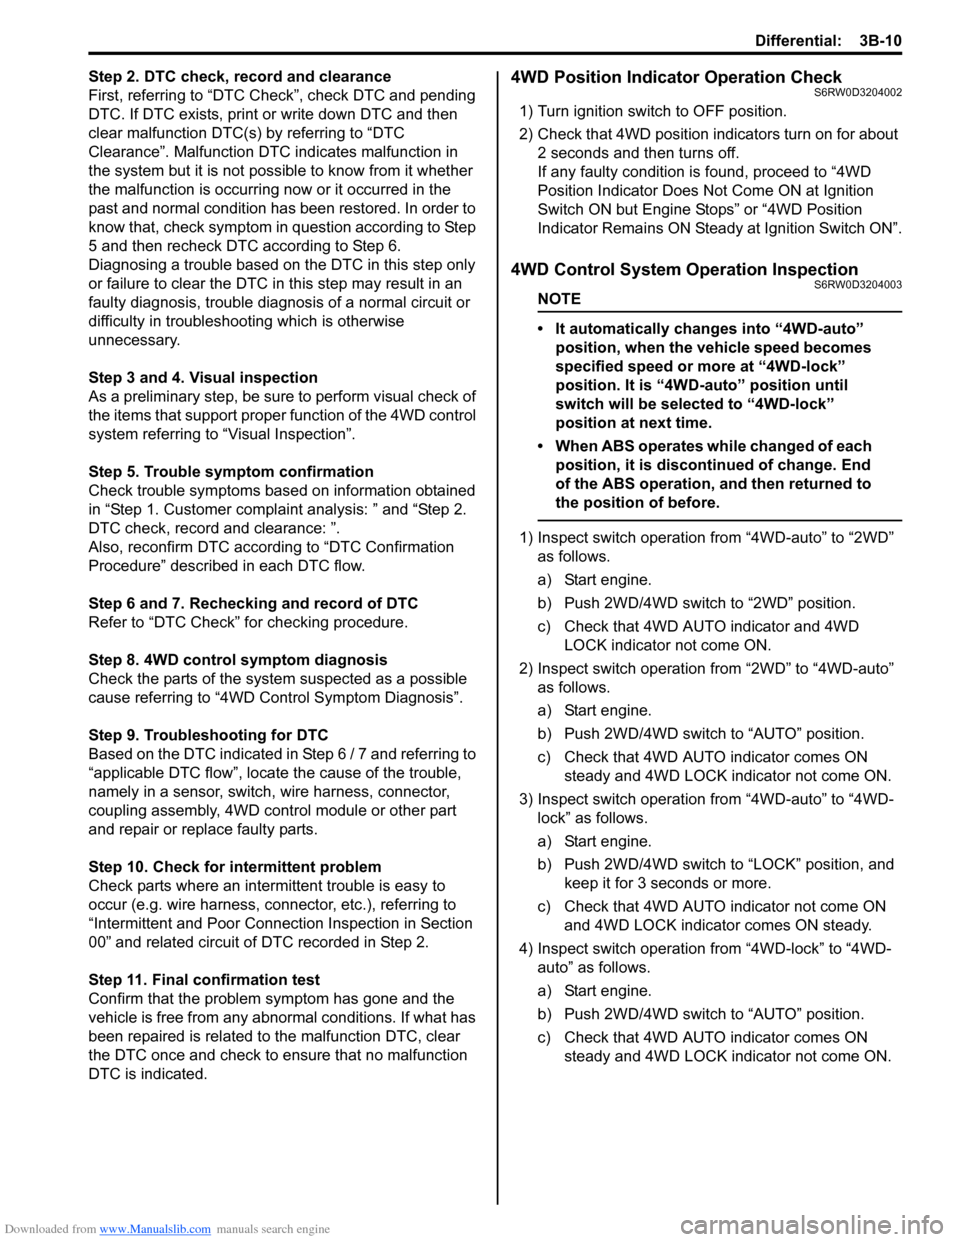 SUZUKI SX4 2006 1.G Service Workshop Manual Downloaded from www.Manualslib.com manuals search engine Differential: 3B-10
Step 2. DTC check, record and clearance
First, referring to “DTC Check”, check DTC and pending 
DTC. If DTC exists, pri